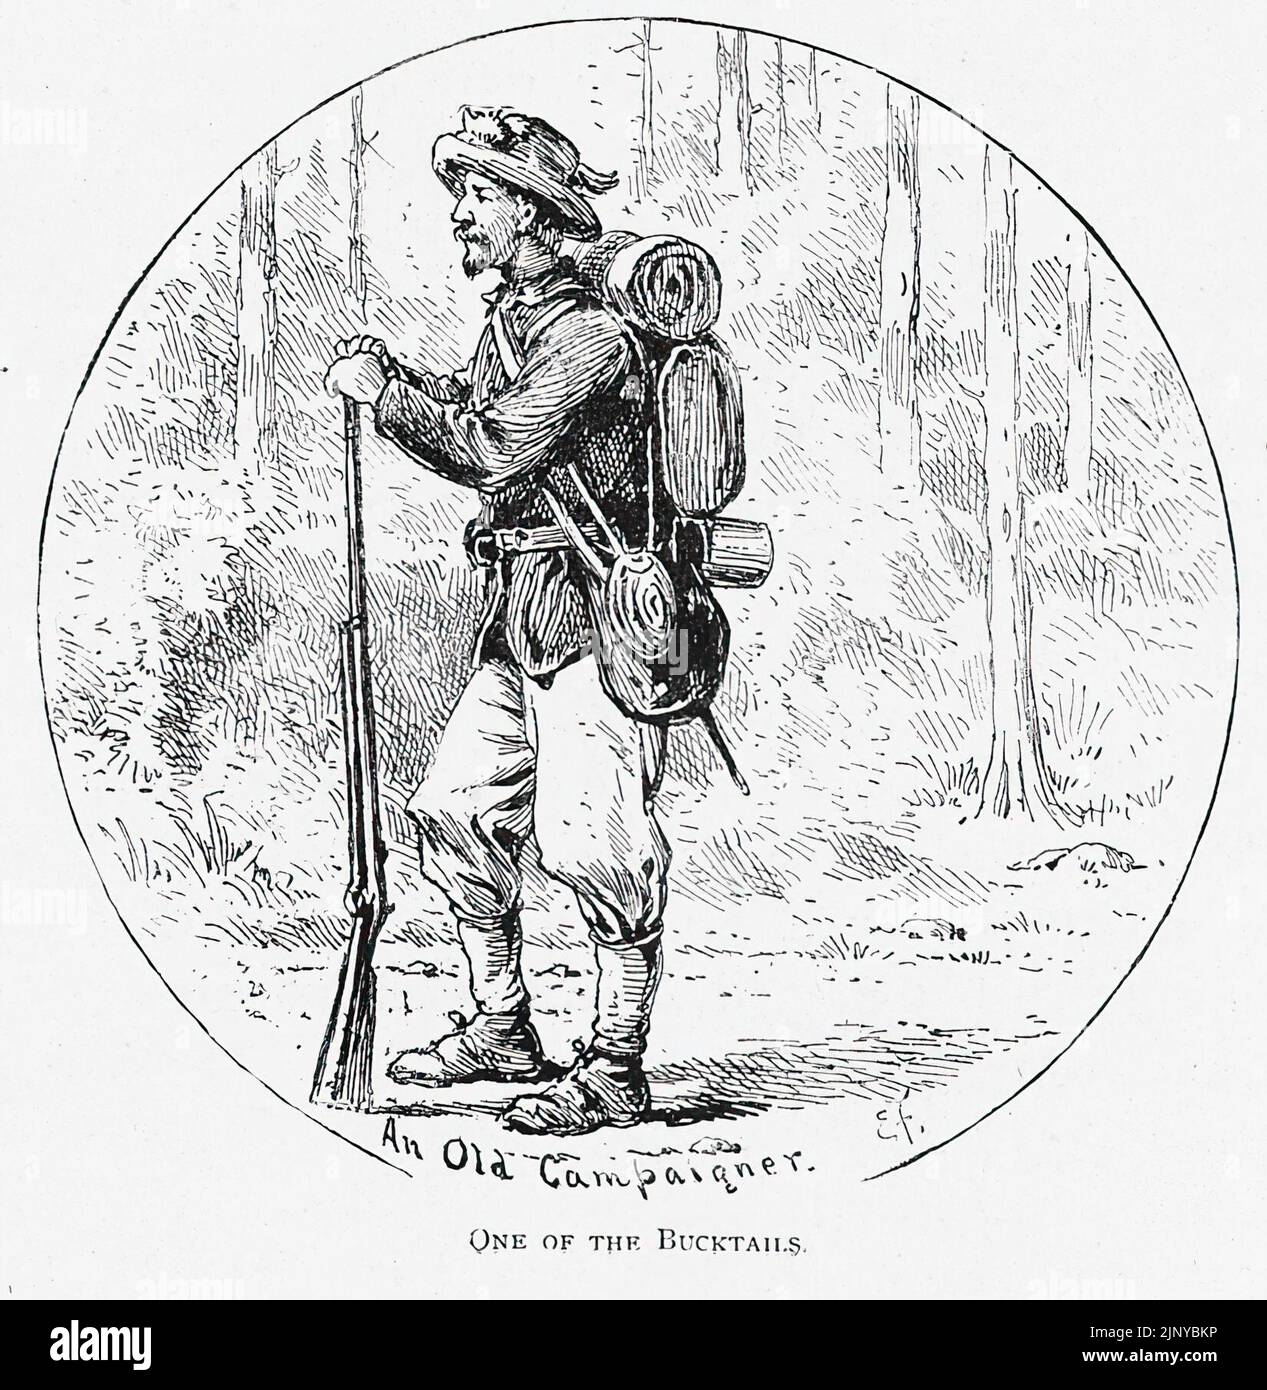 An Old Campaigner - One of the Bucktails. 13th Pennsylvania Reserve Regiment, Kane's Rifles. 19th century American Civil War illustration by Edwin Forbes Stock Photo